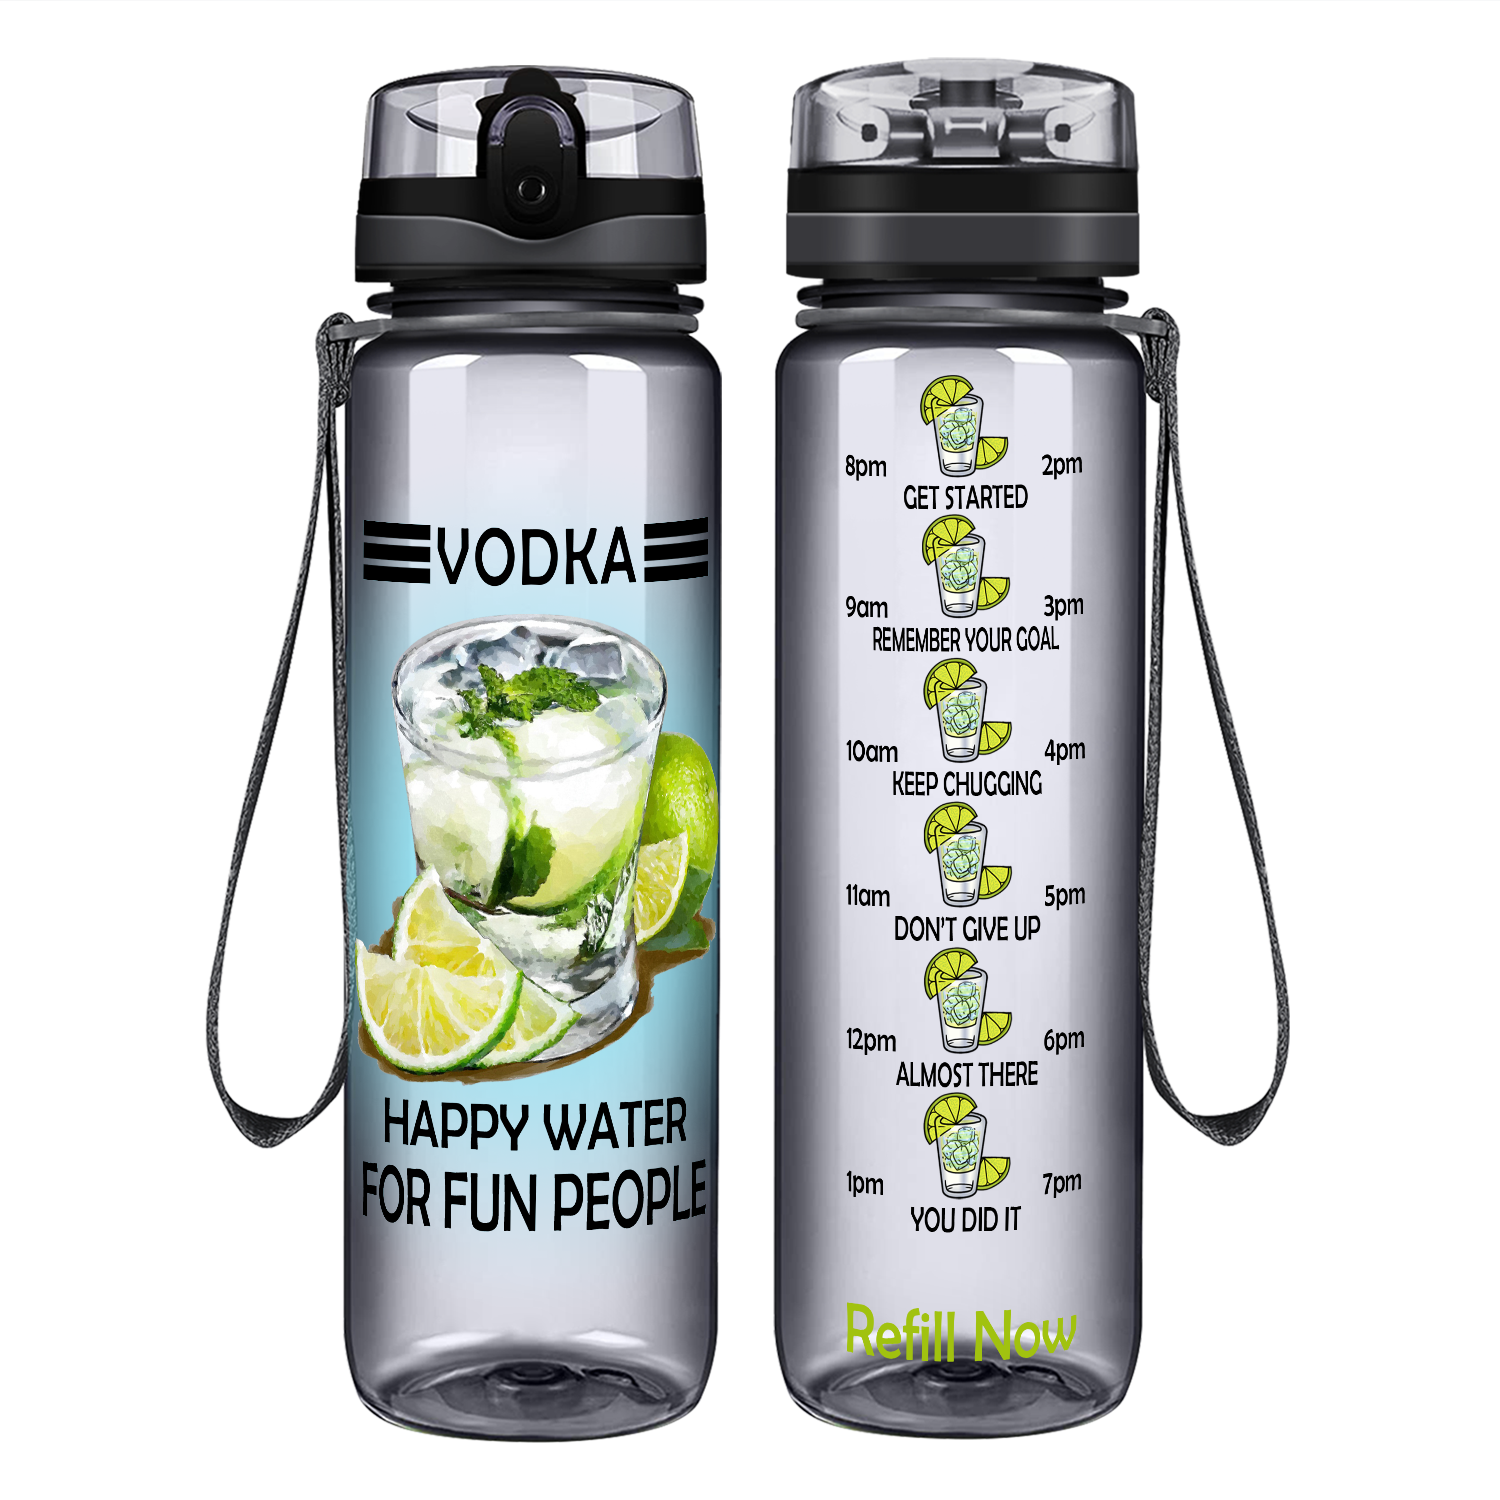 Vodka Happy Water for Fun People on 32 oz Motivational Tracking Water Bottle